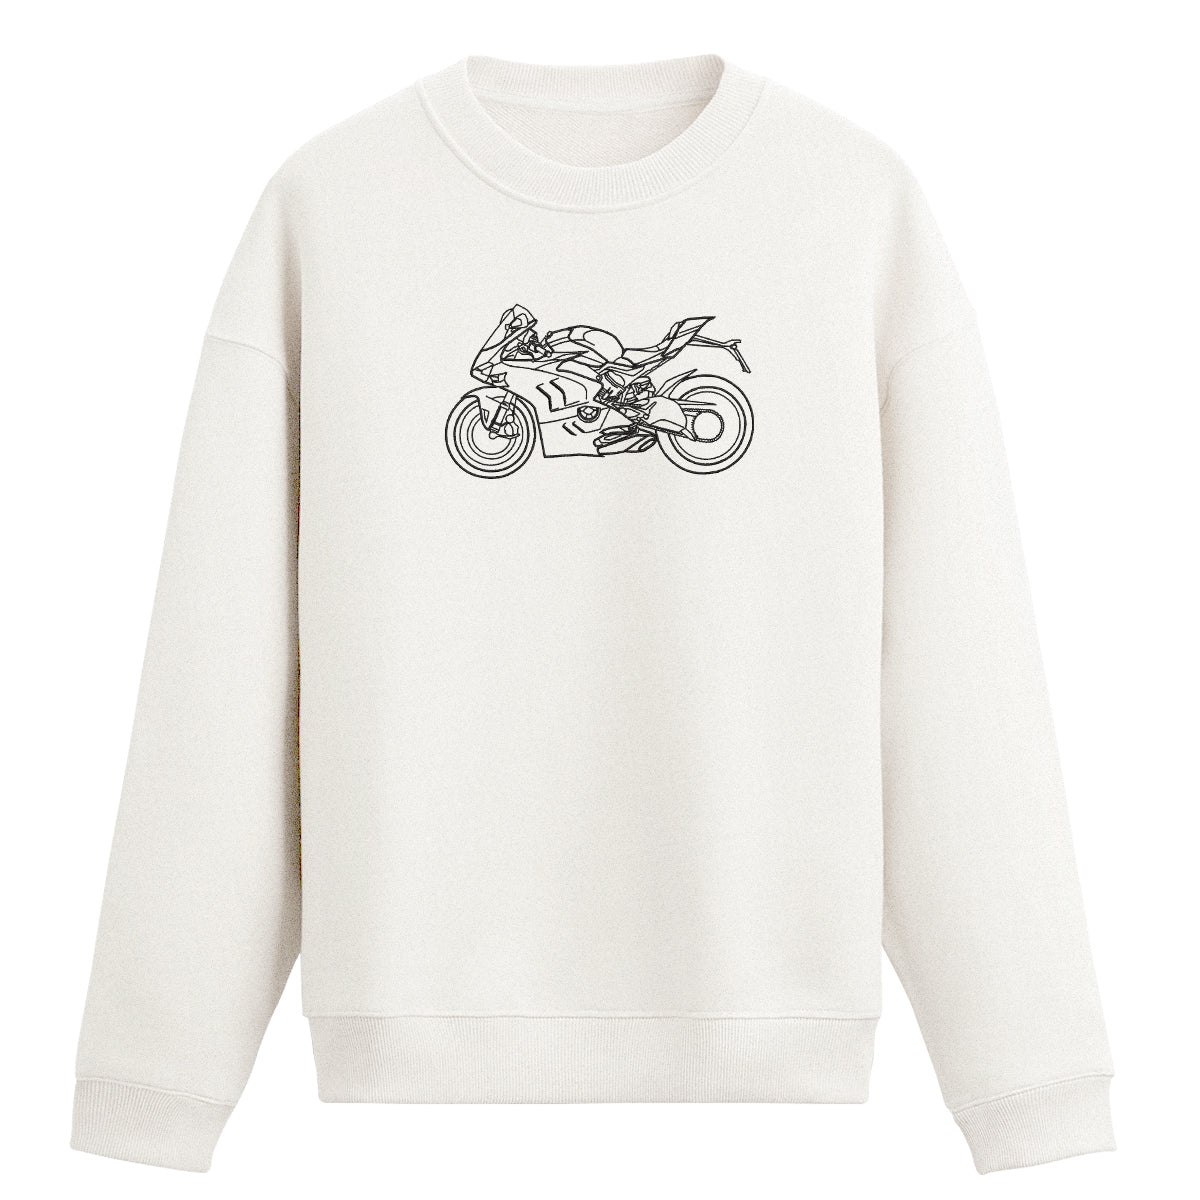 Custom Motorcycle Portrait Outline Embroidered Shirt